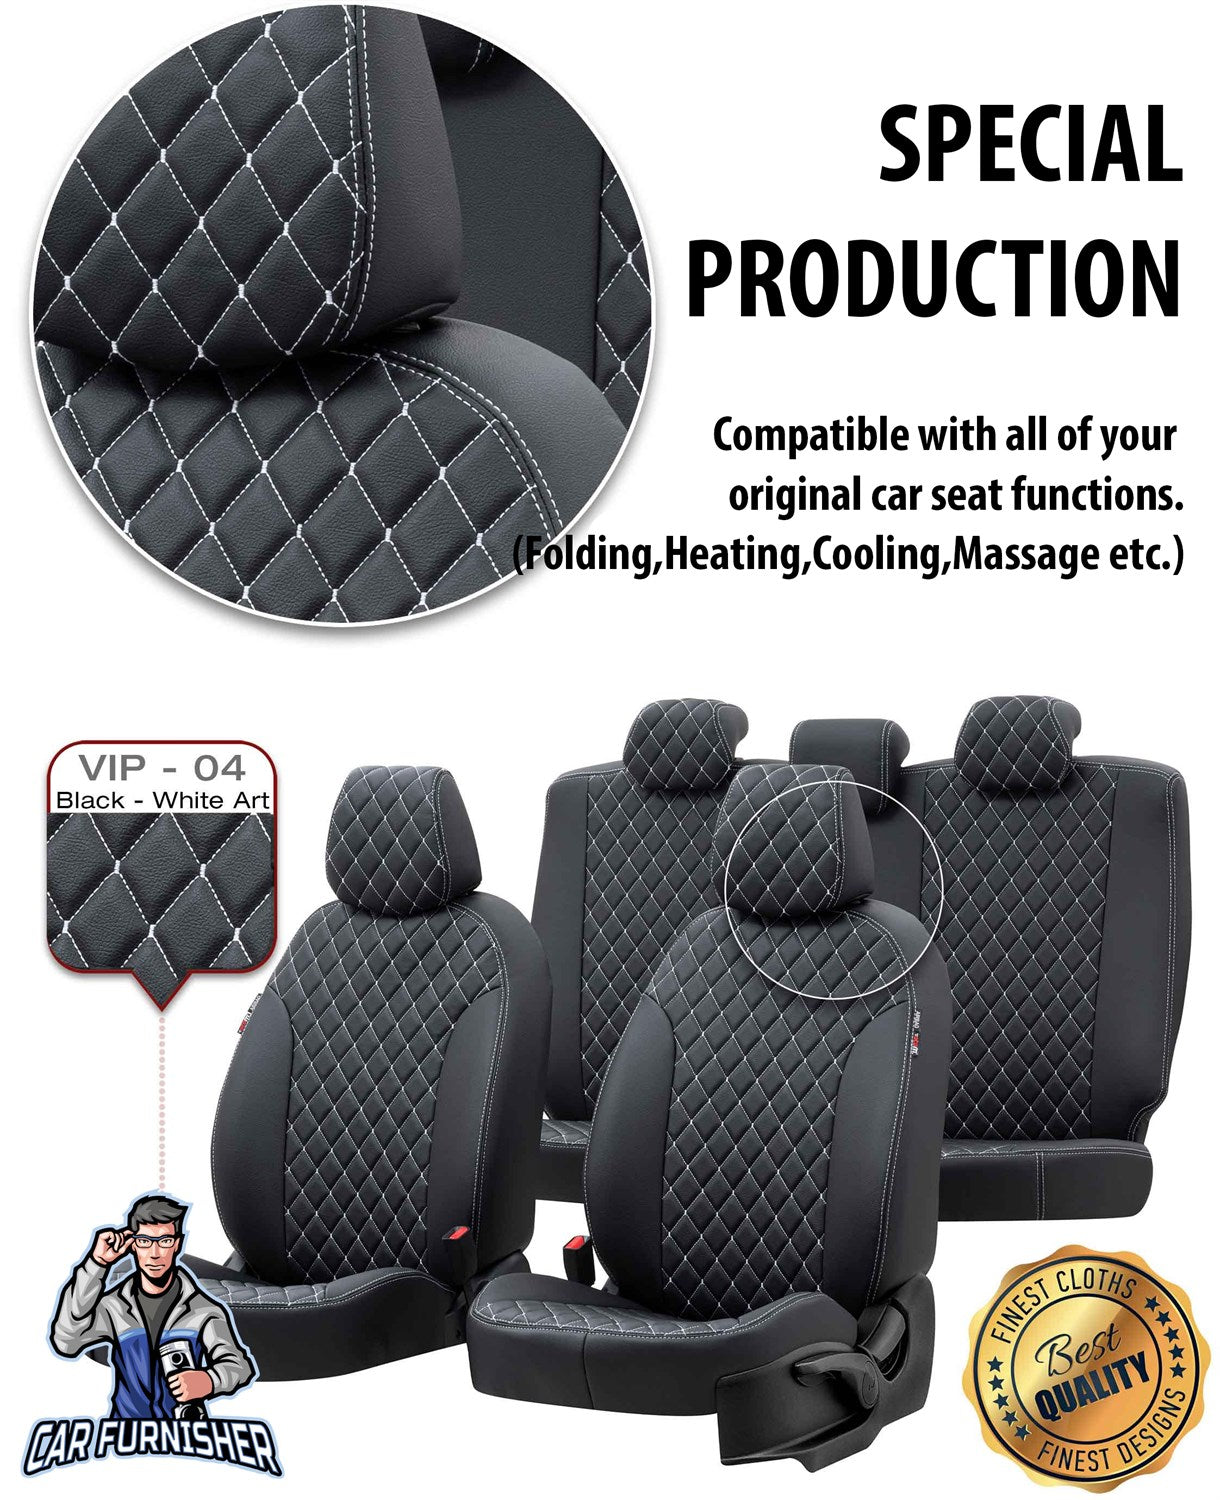 Mitsubishi Outlander Seat Covers Madrid Leather Design Dark Gray Leather